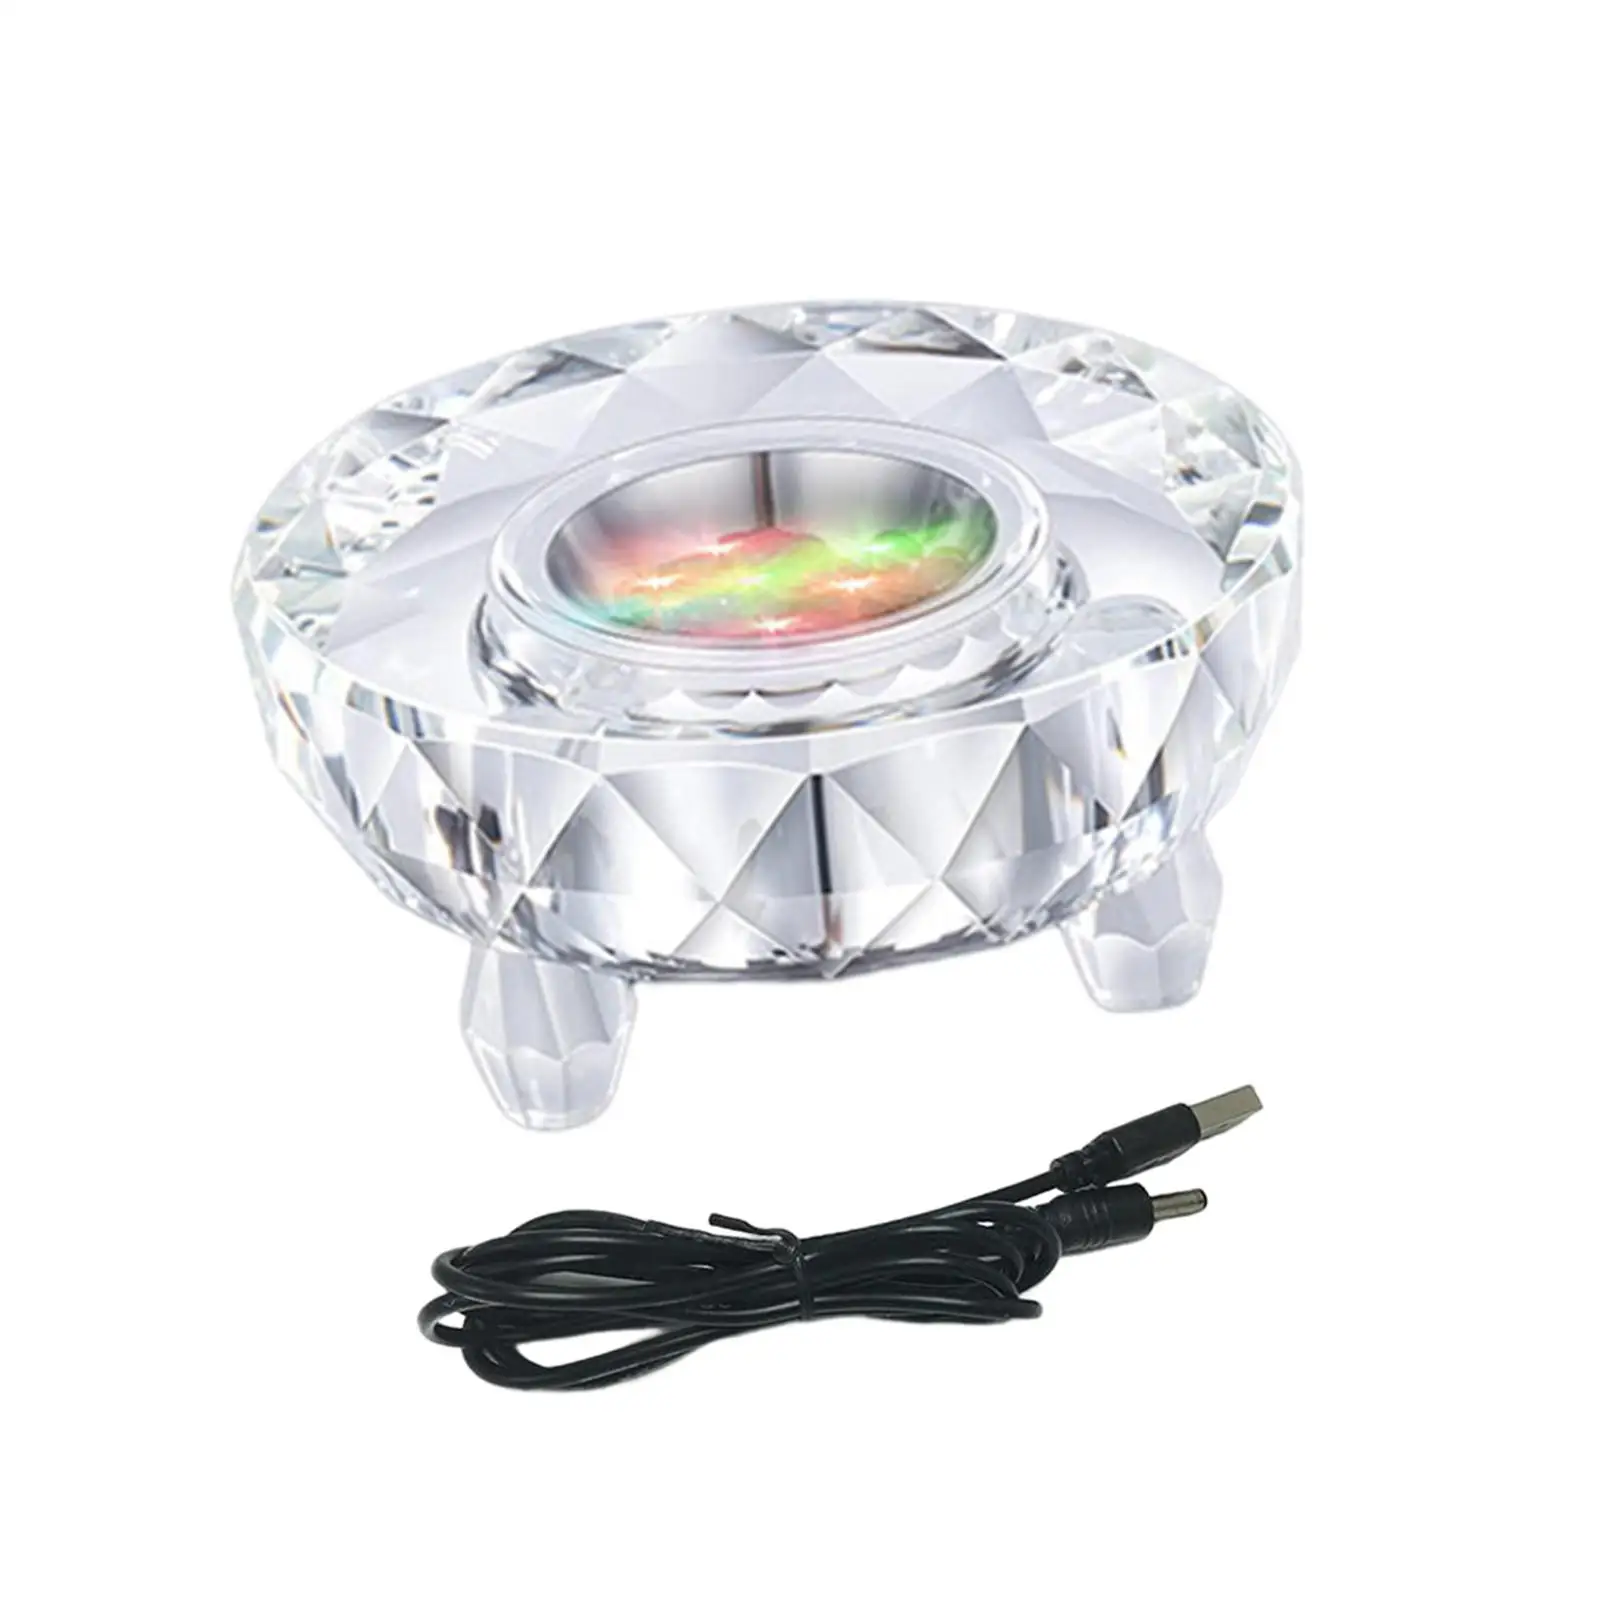 Crystal Light Base Auto Flashing USB Lighted Lamp Light Stand Base for Jewelry Show 3D Crystal Photo Acrylic Statues Cup Decor